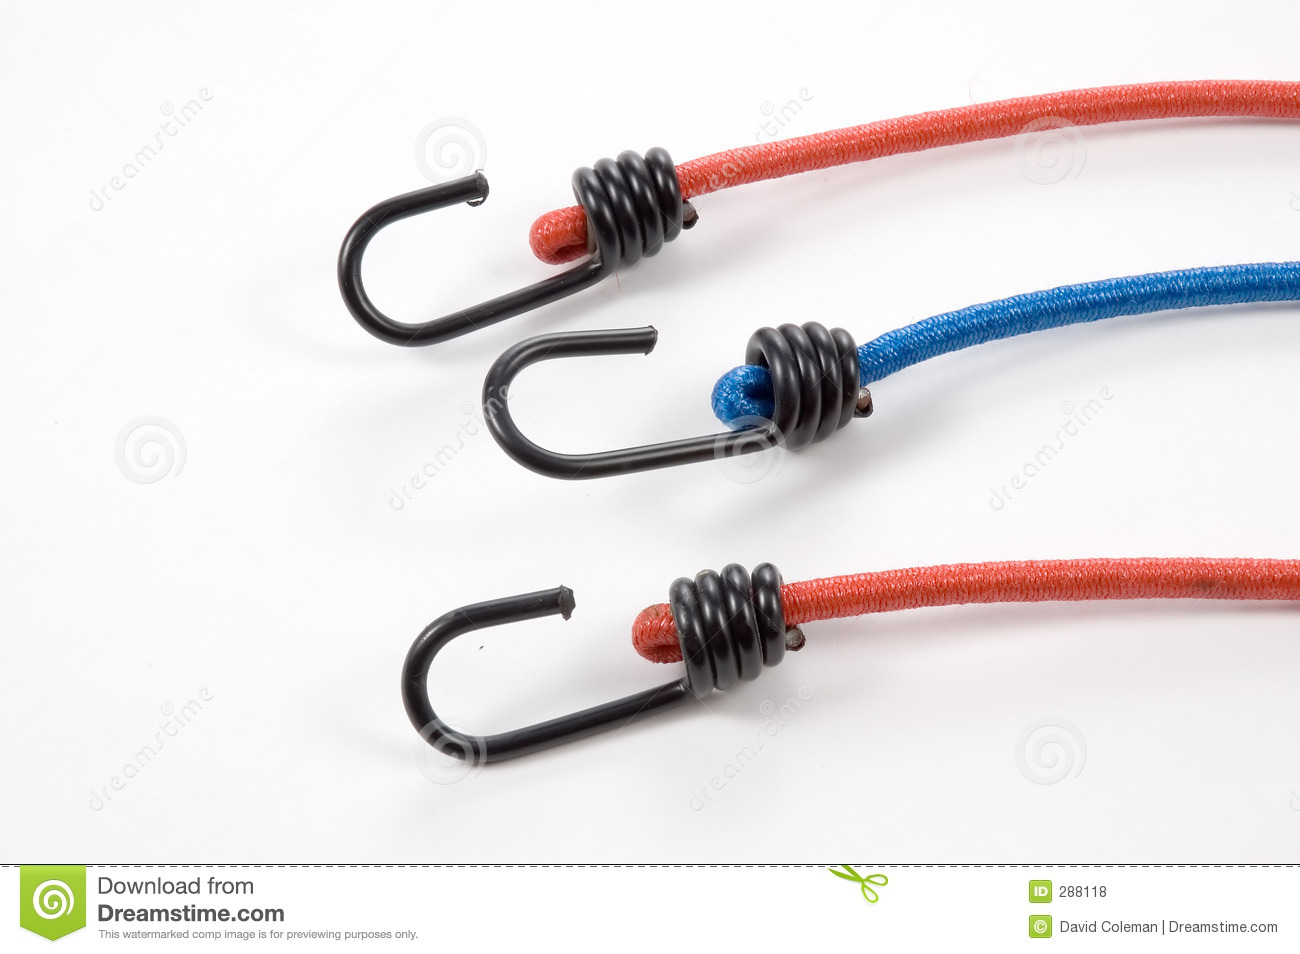 Bungee Chords Royalty Free Stock Photos   Image  288118